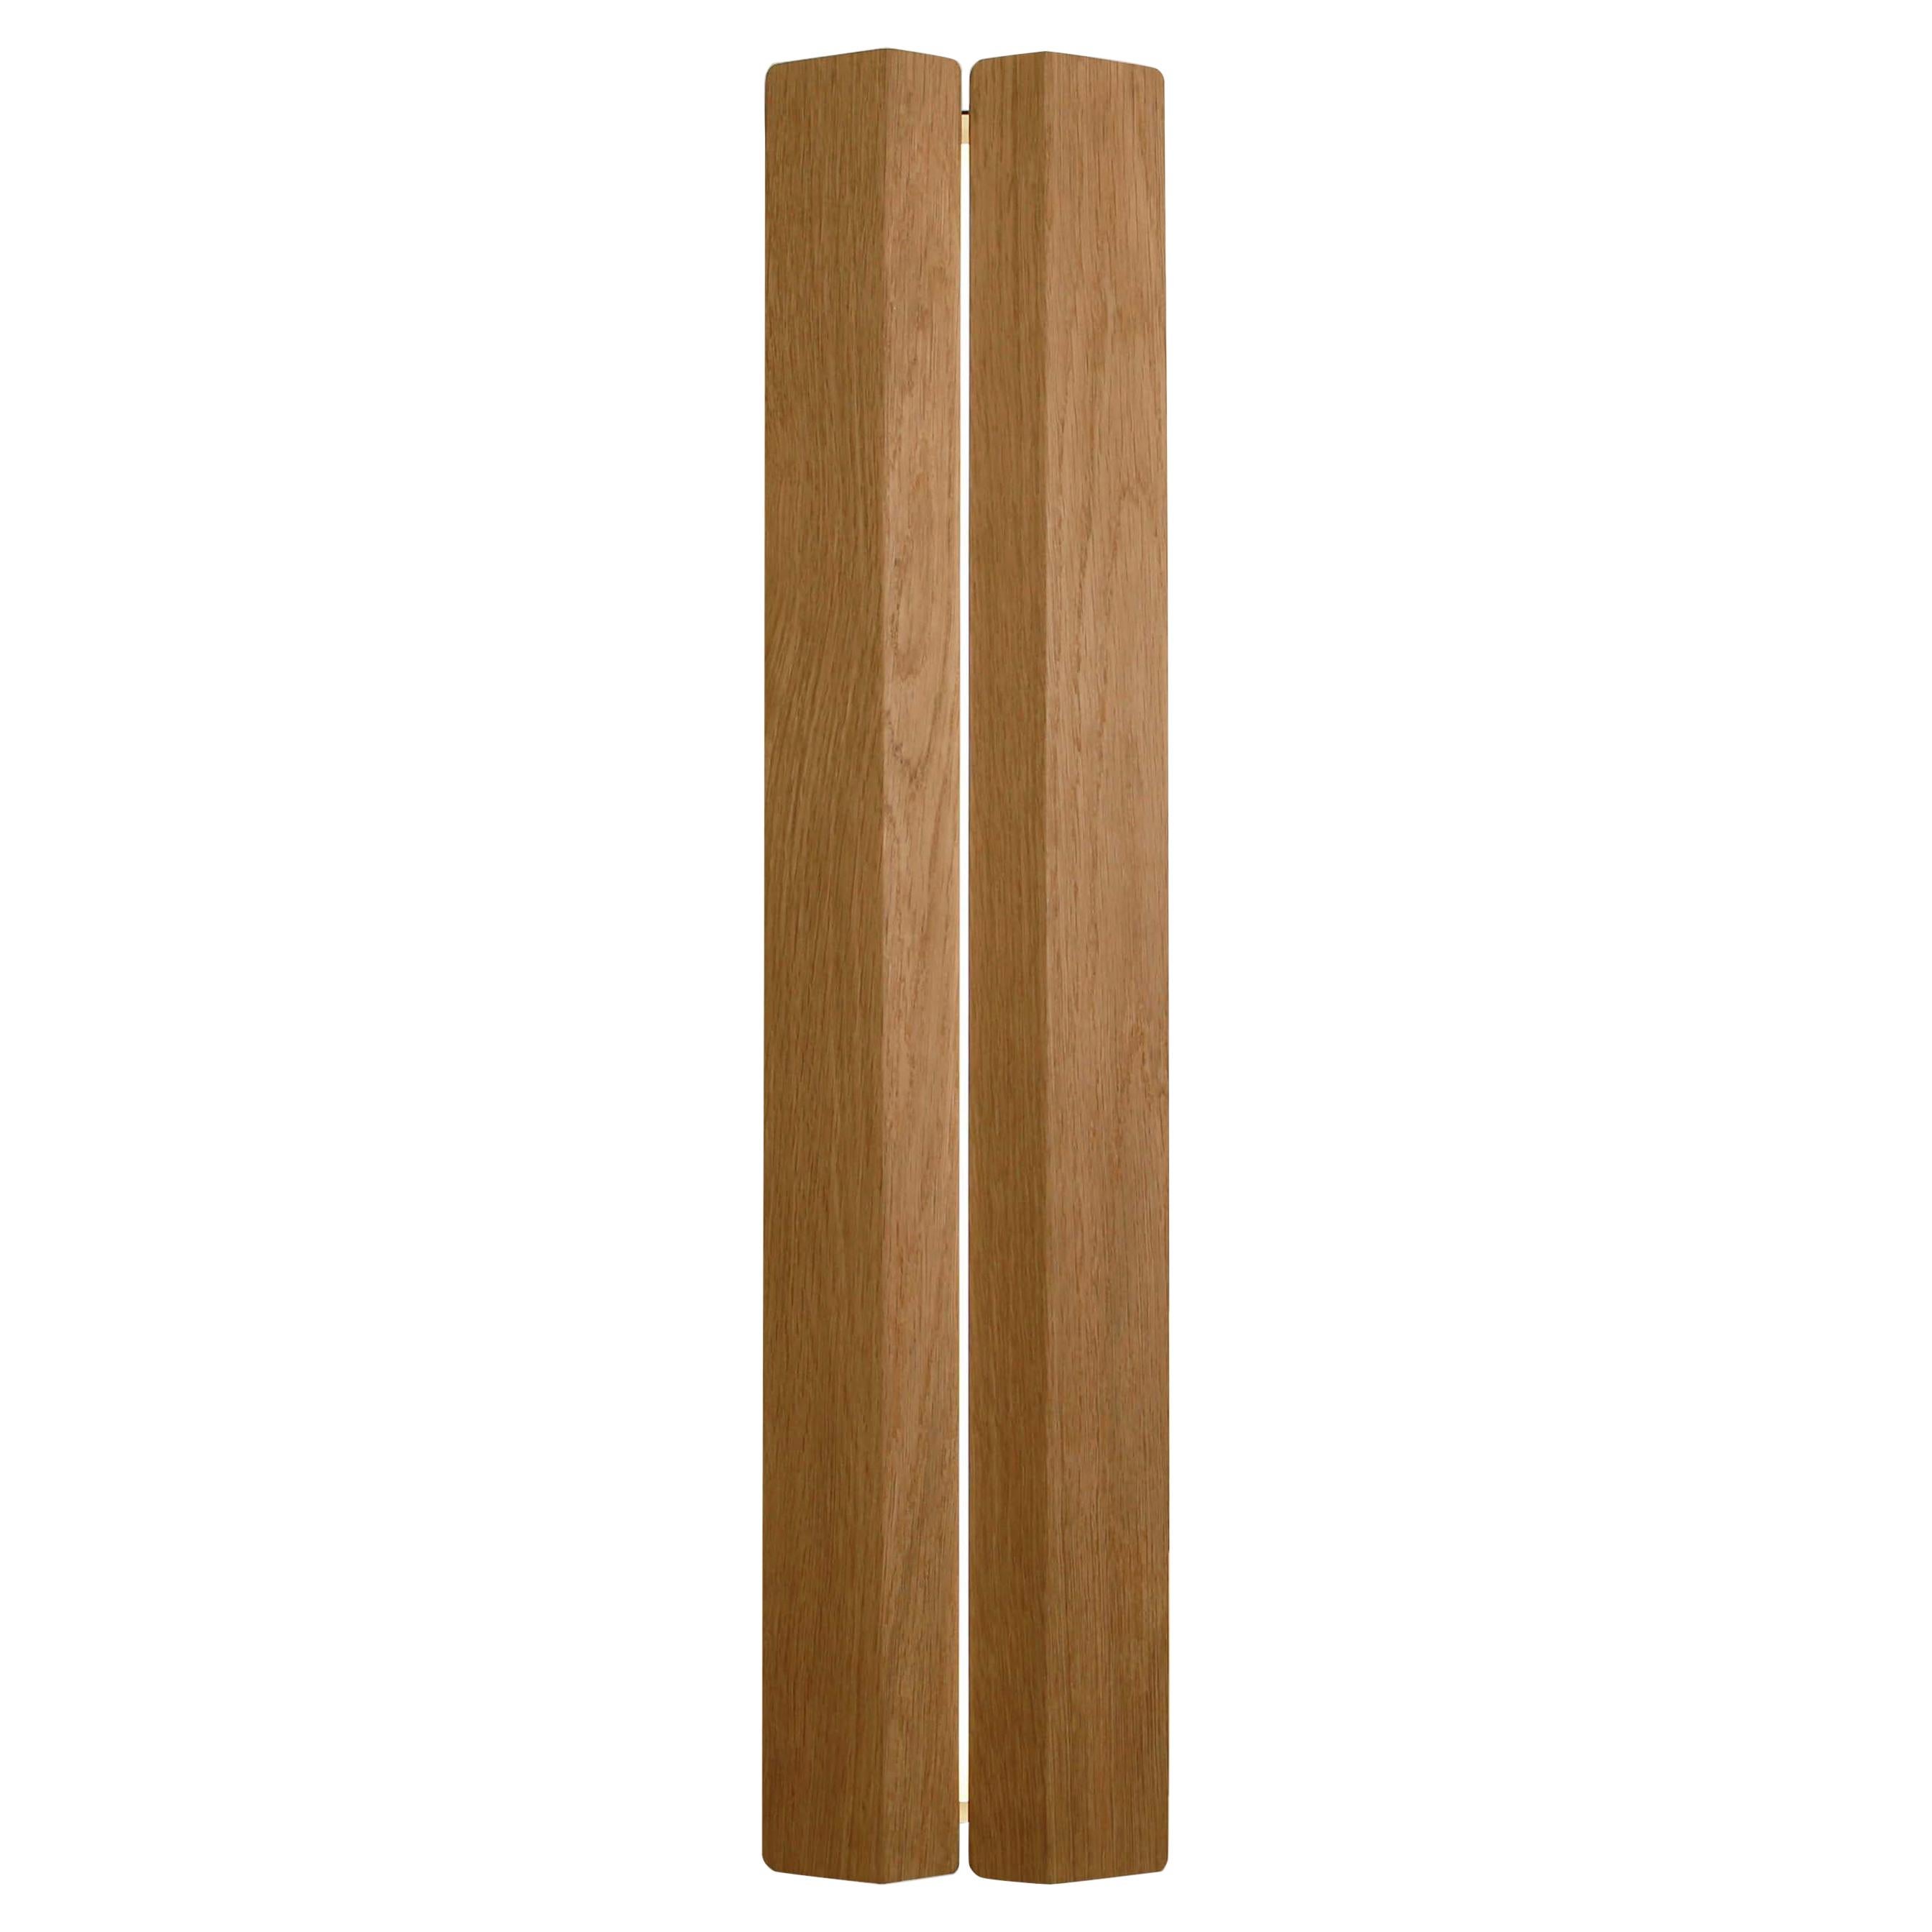 Outdoor Rated Ada Sconce 26 in Oak by Ravenhill Studio